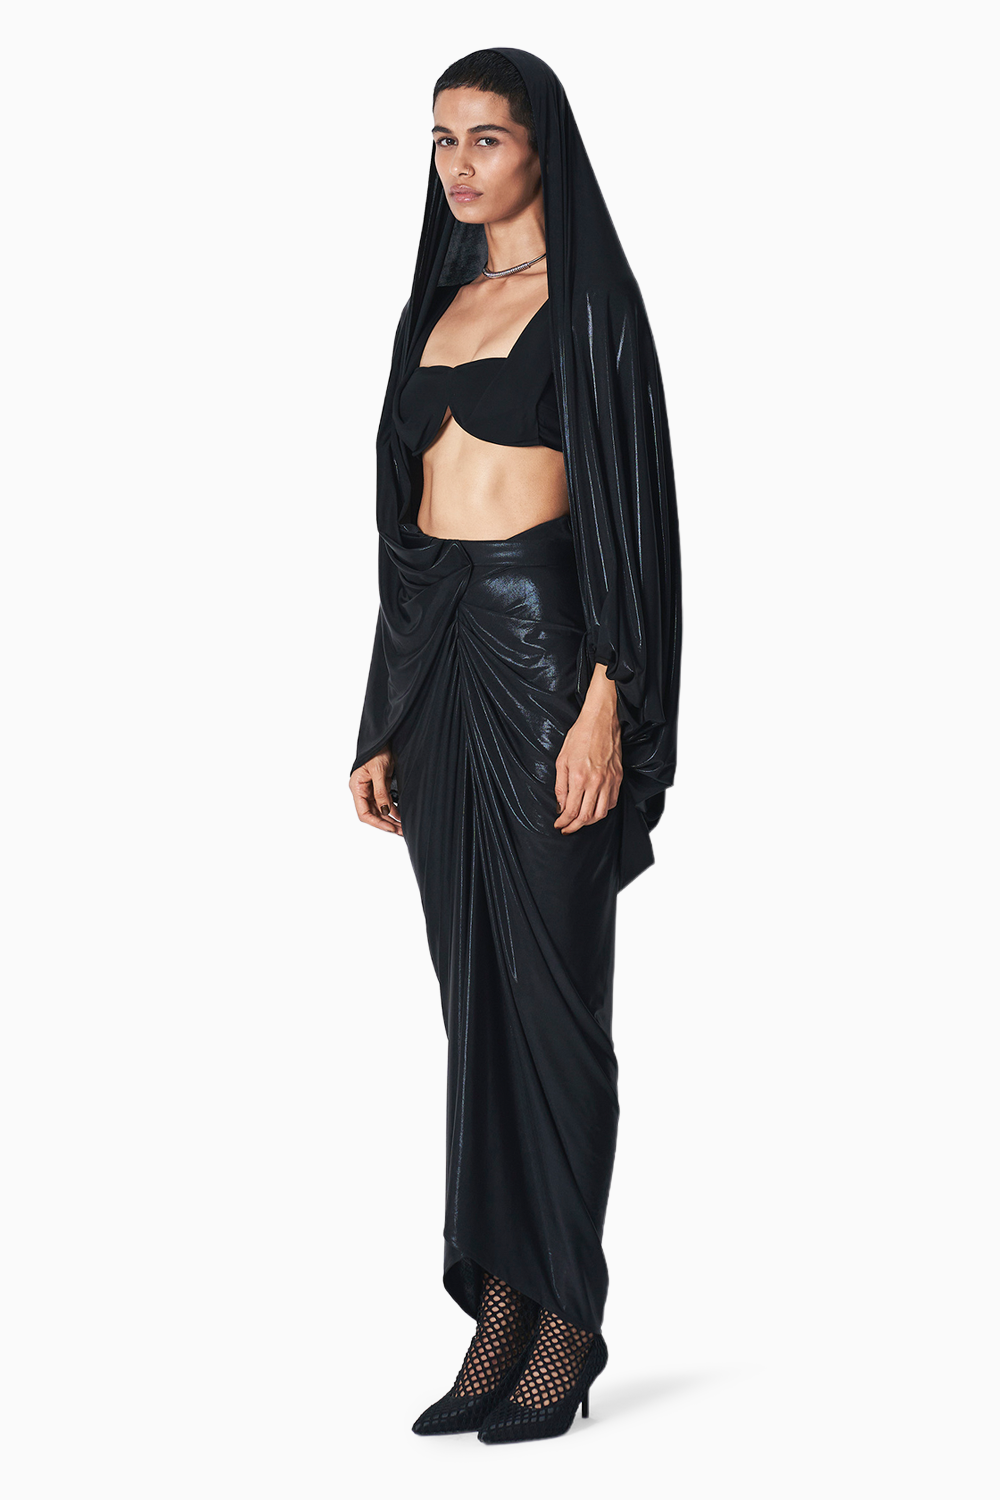 Fio Top and Liquid Nora Skirt with Kanye Cape